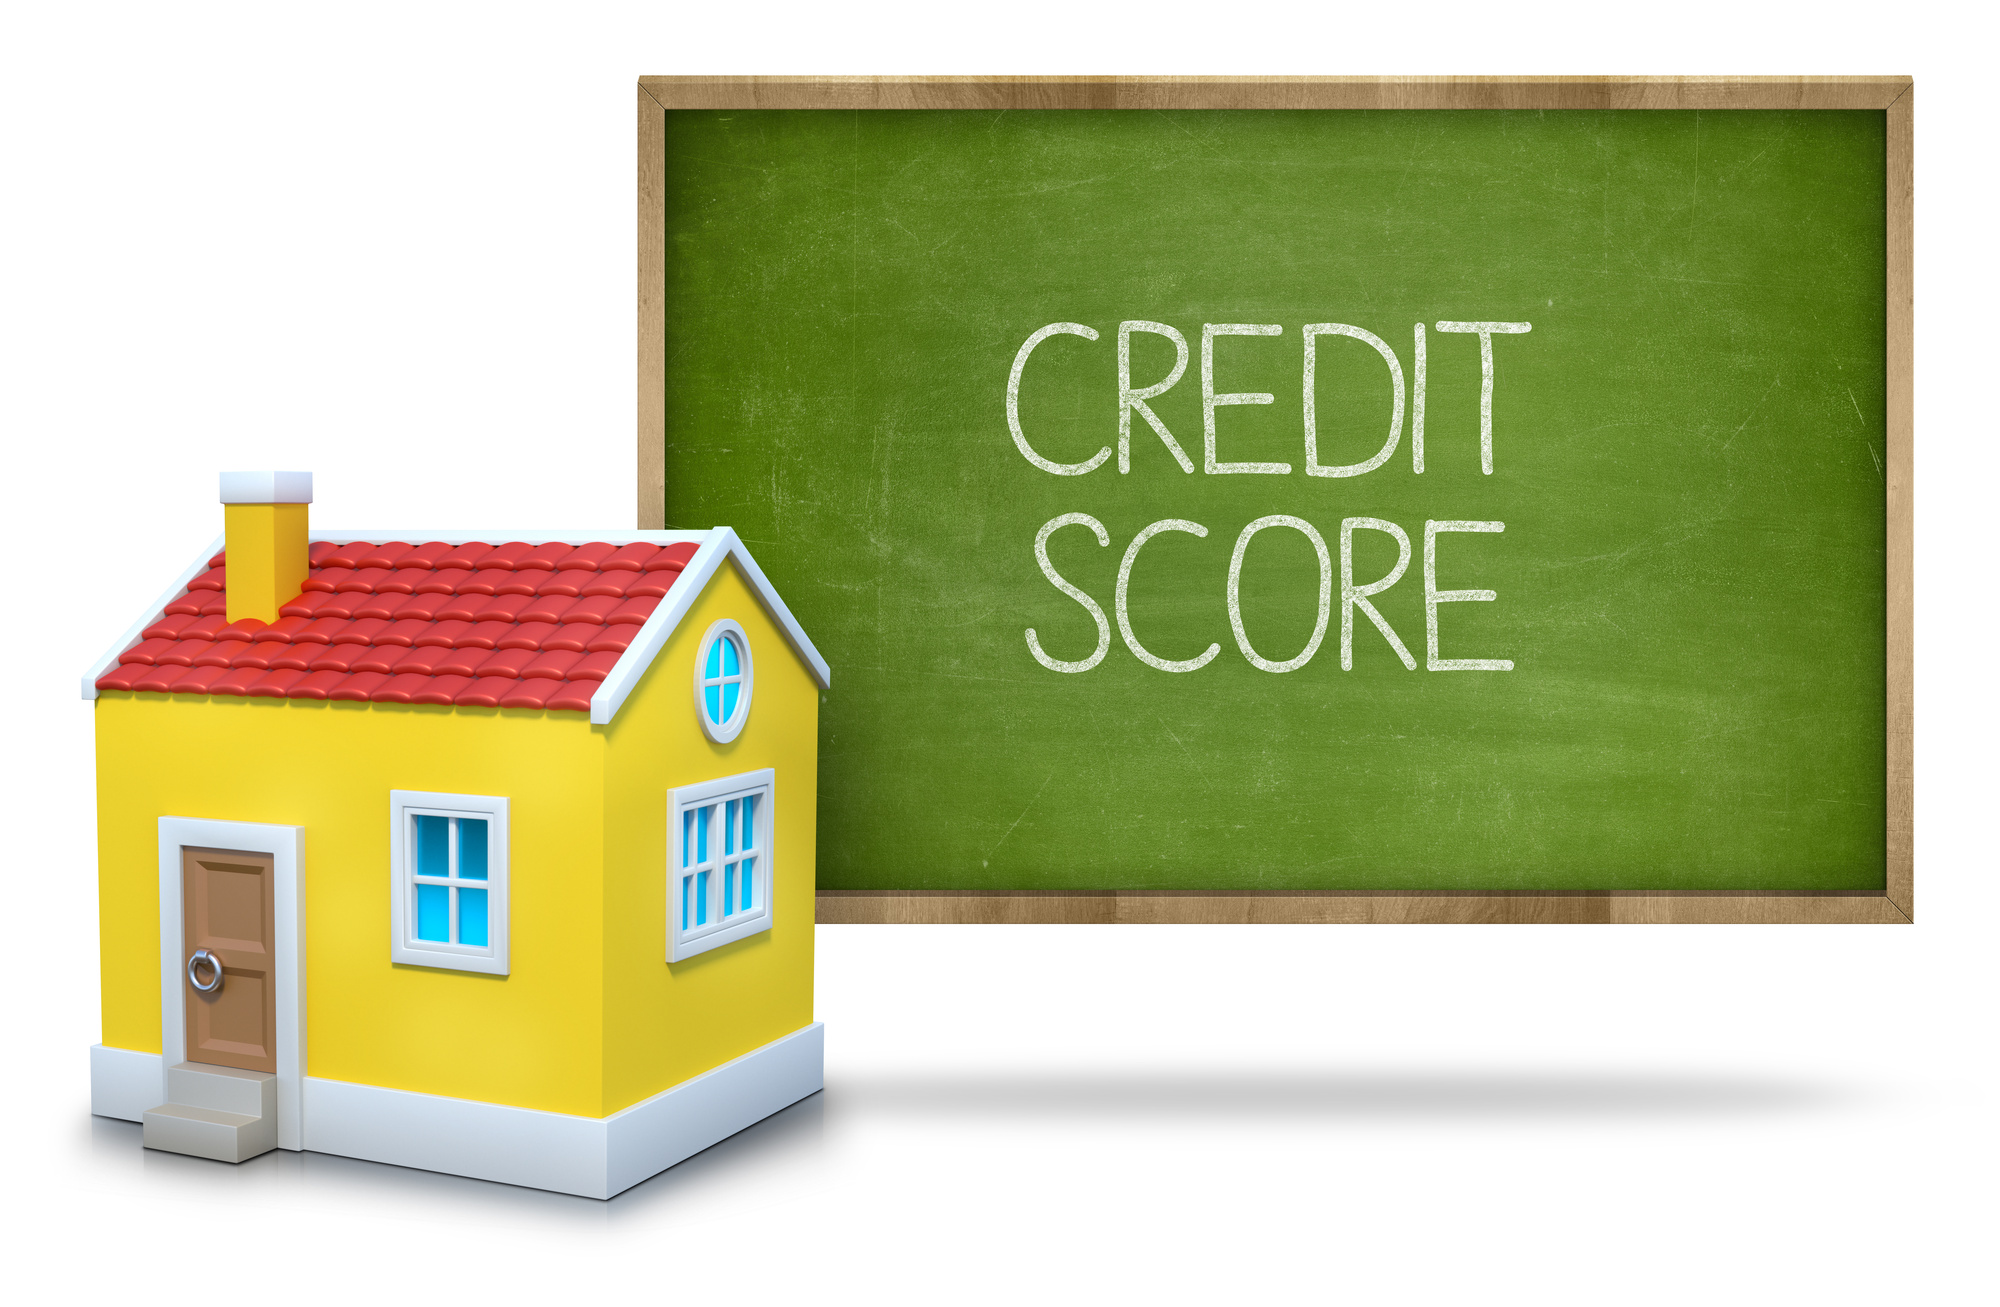 credit score sign and house